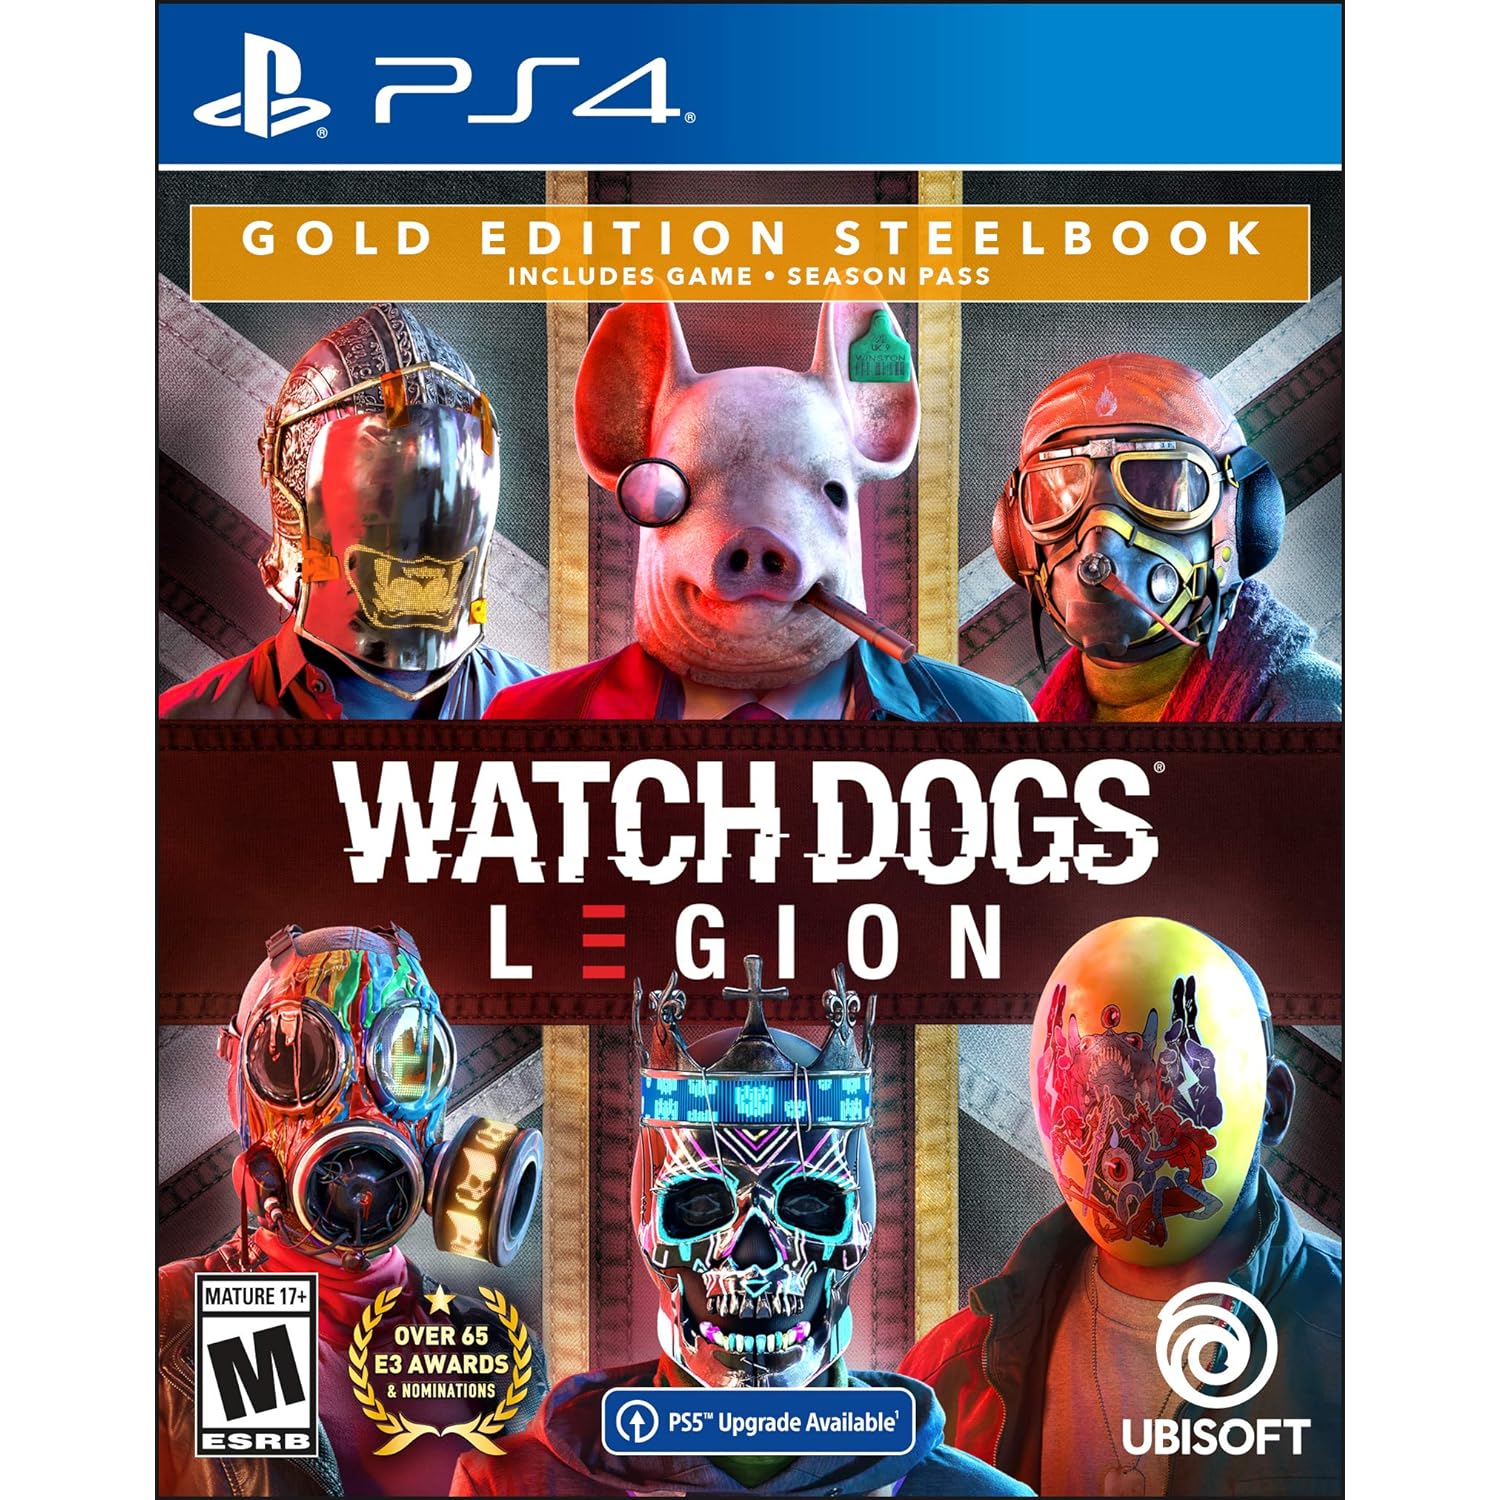 Ubisoft Watch Dogs: Legion PlayStation 4 Gold Steelbook Edition with free upgrade to the digital PS5 version